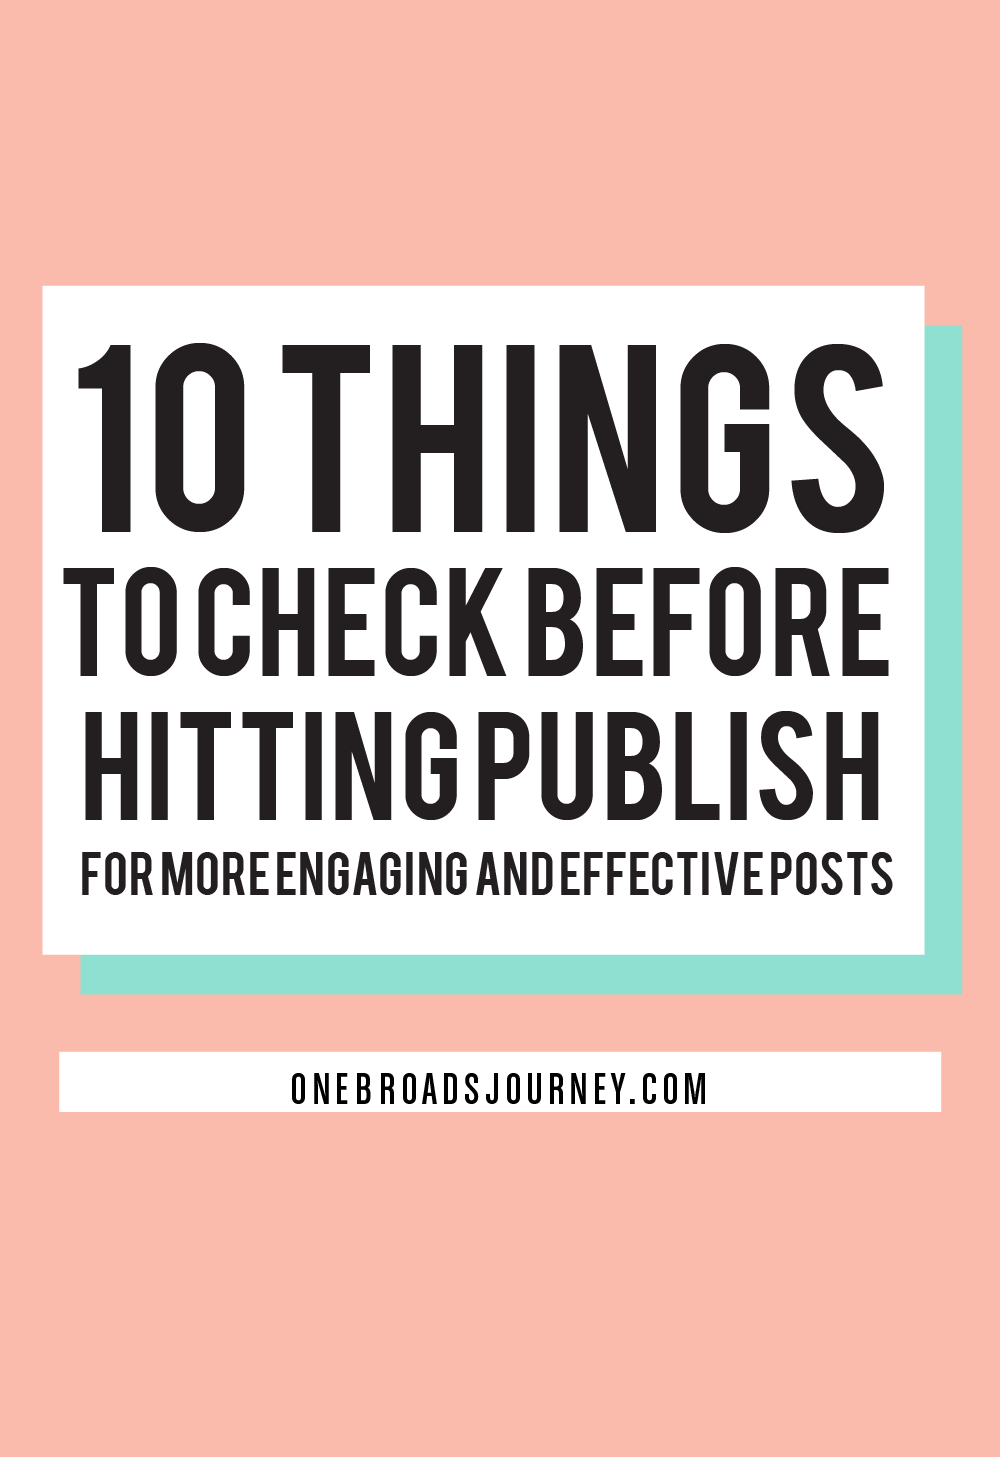 10Things to check before hitting publish blogger